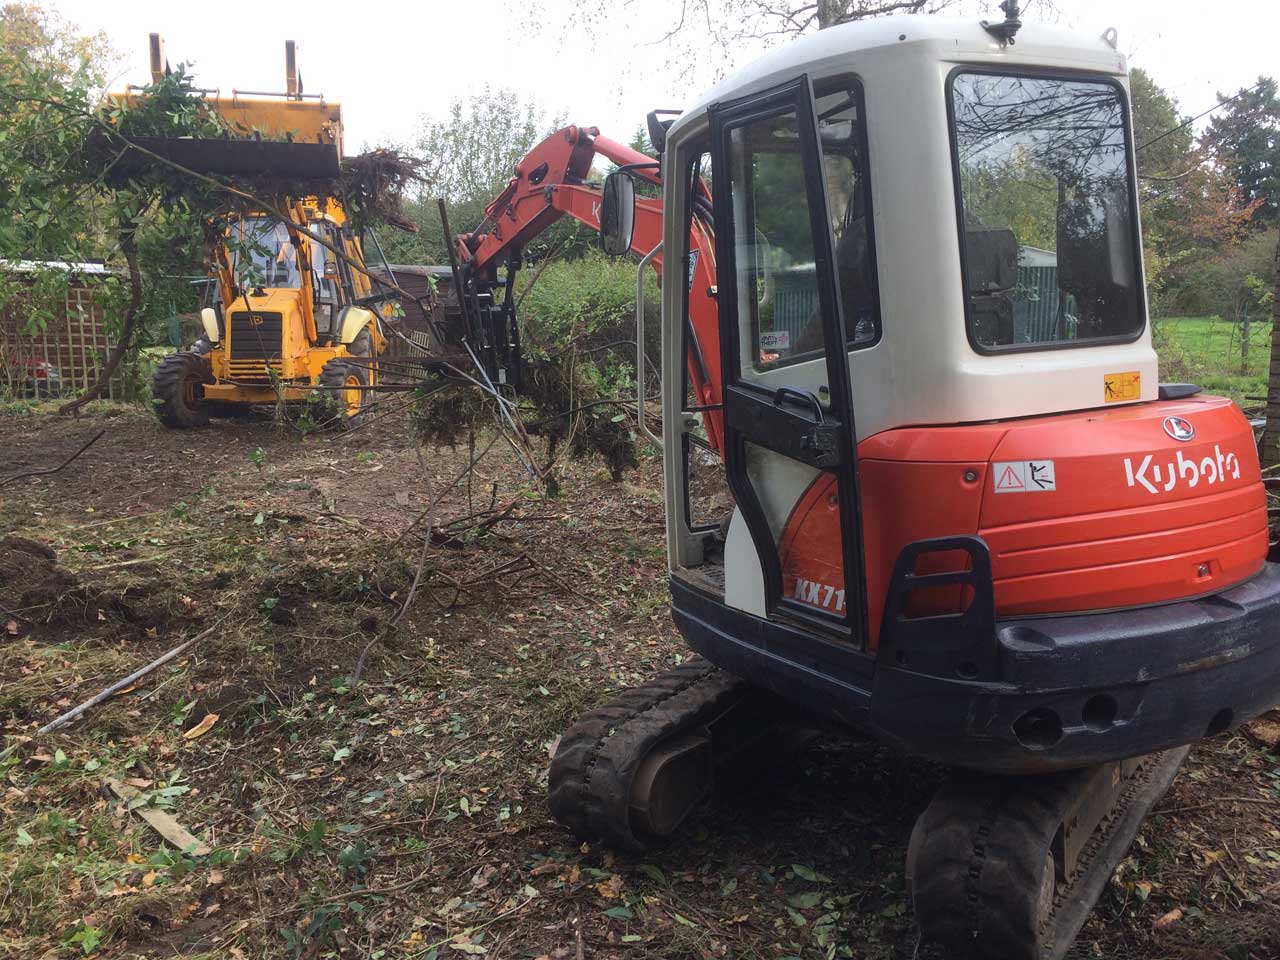 Image of a Kubota excavator and a JCB clearing land in Ascot, Berkshire - Land clearance in Ascot, Berkshire preparing for seeding - land clearing by kubota and JCB in Ascot, Berkshire - Let the digger do it!